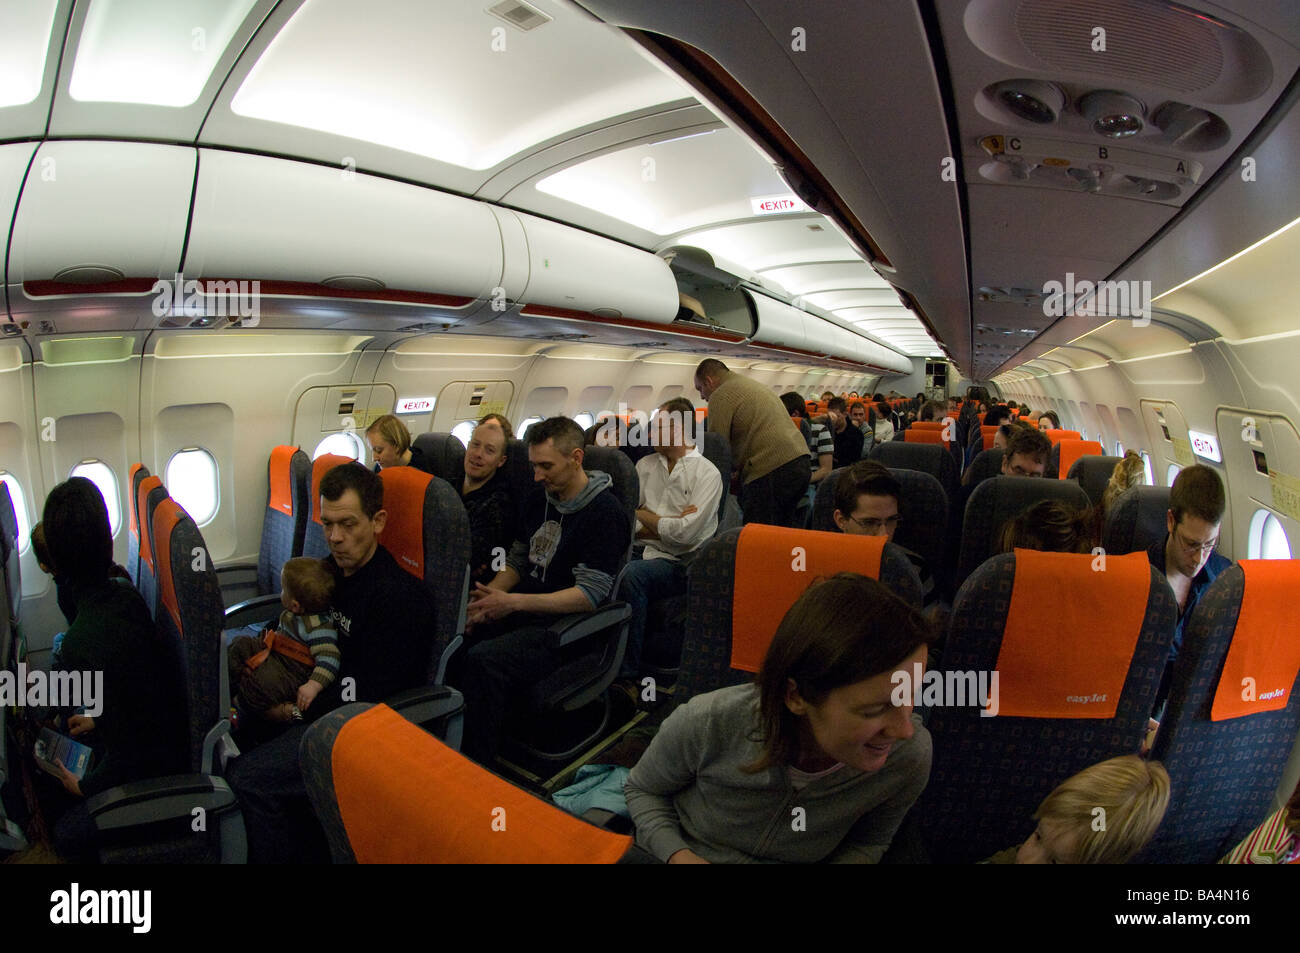 Interior Of Easyjet Airbus A319 Waiting For Take Off Stock Photo